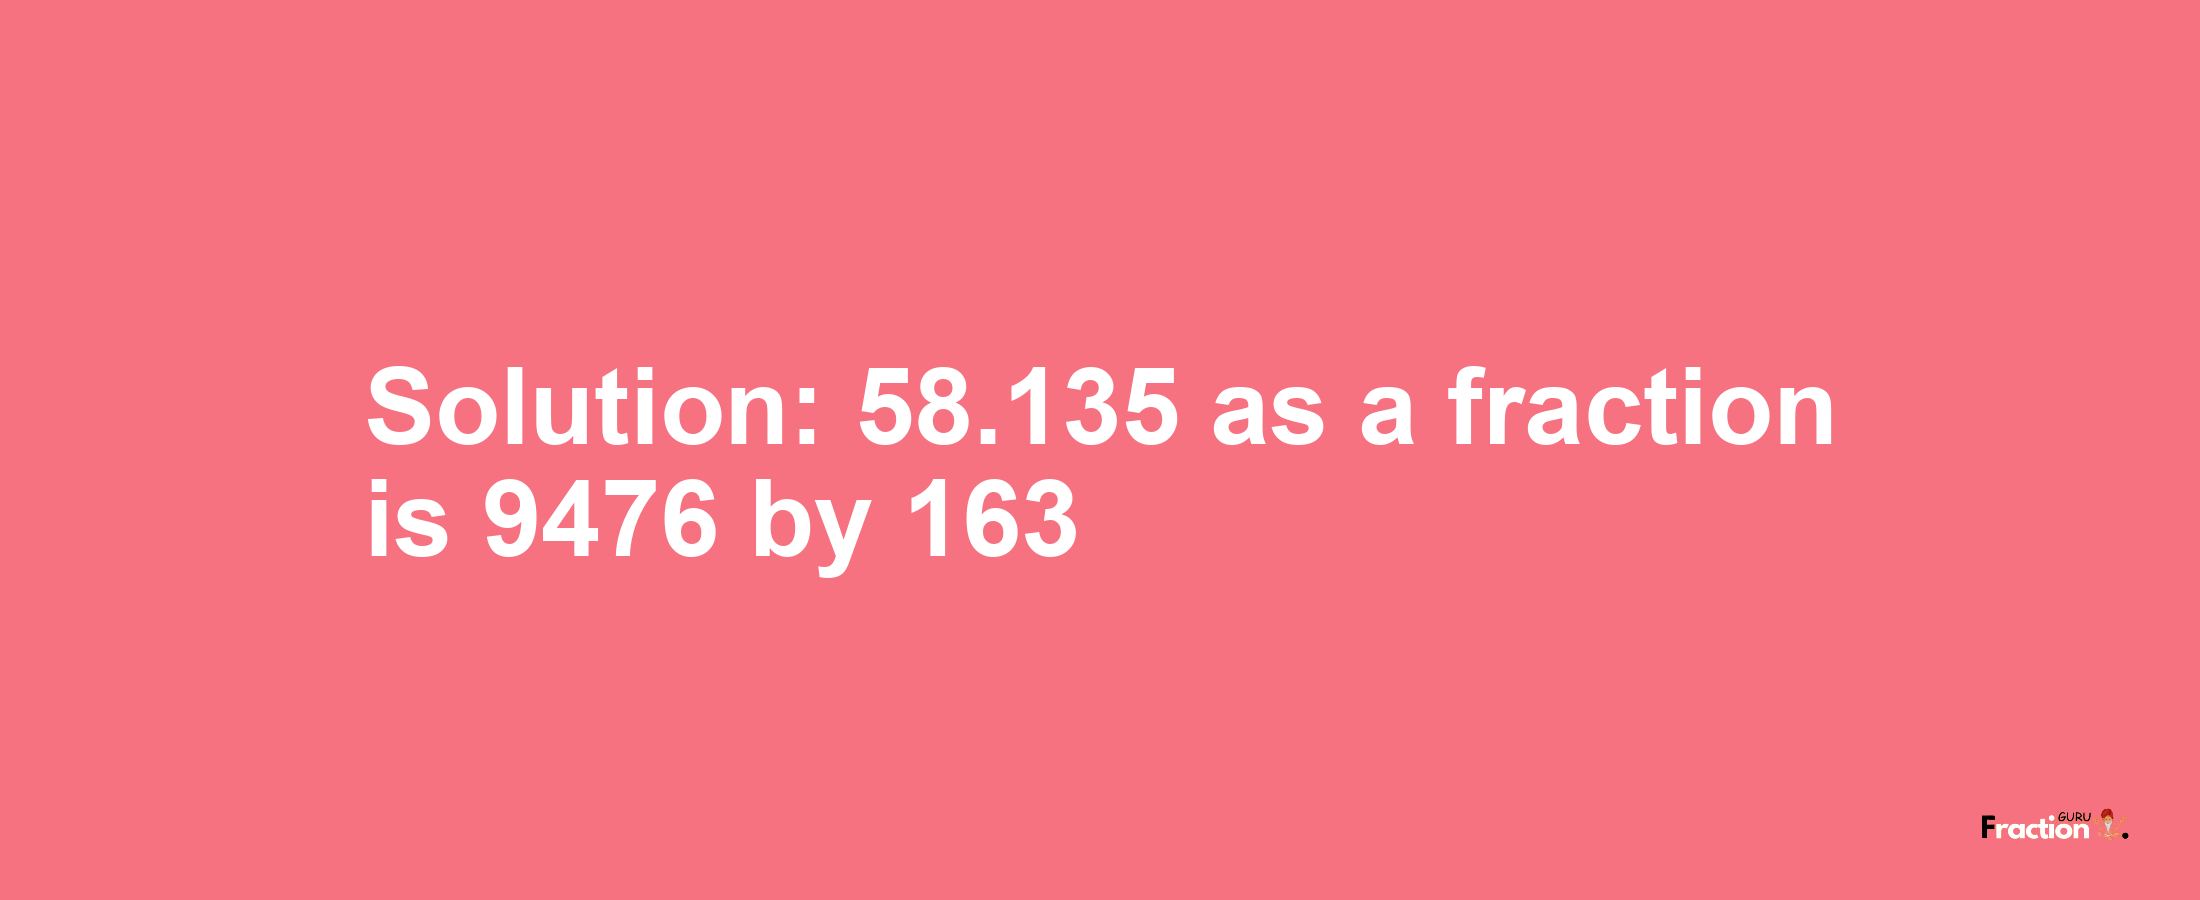 Solution:58.135 as a fraction is 9476/163